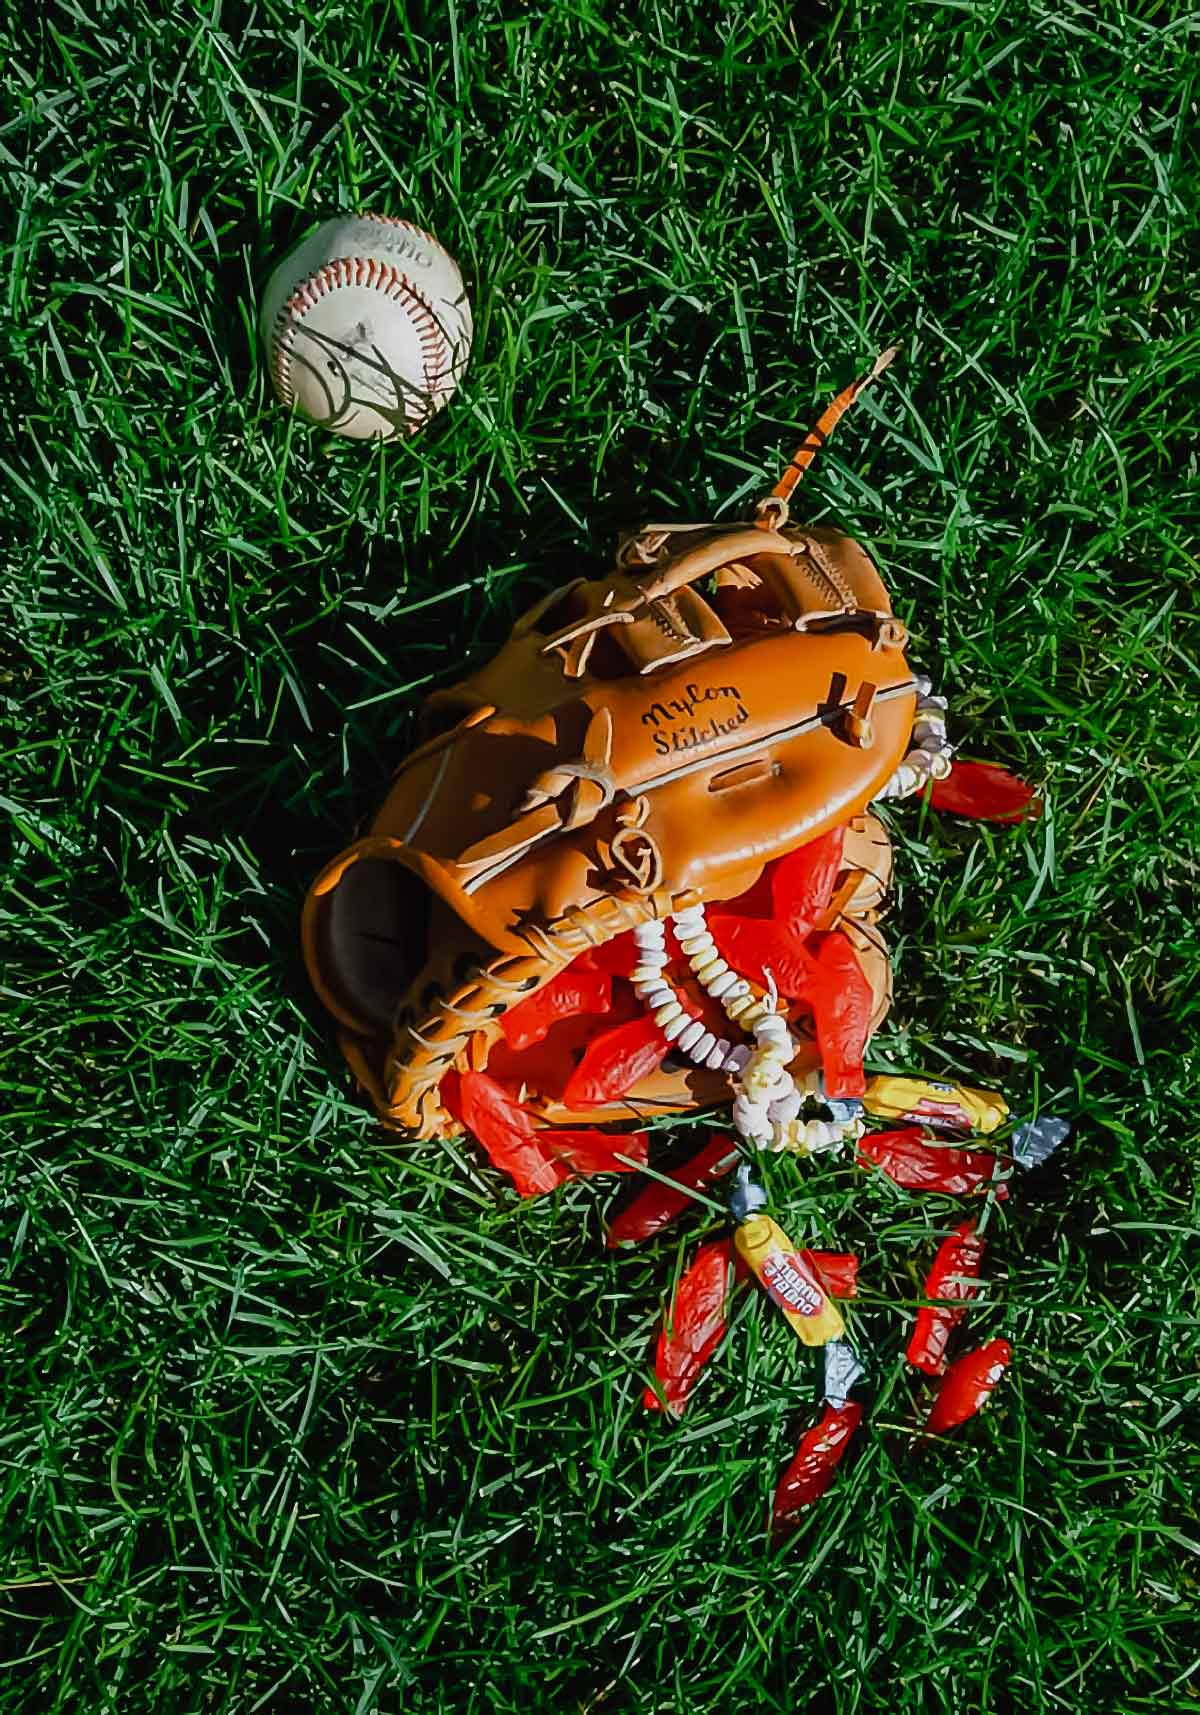 A baseball glove filled with candy and a baseball lying beside it as an illustration of David's problem with balls.